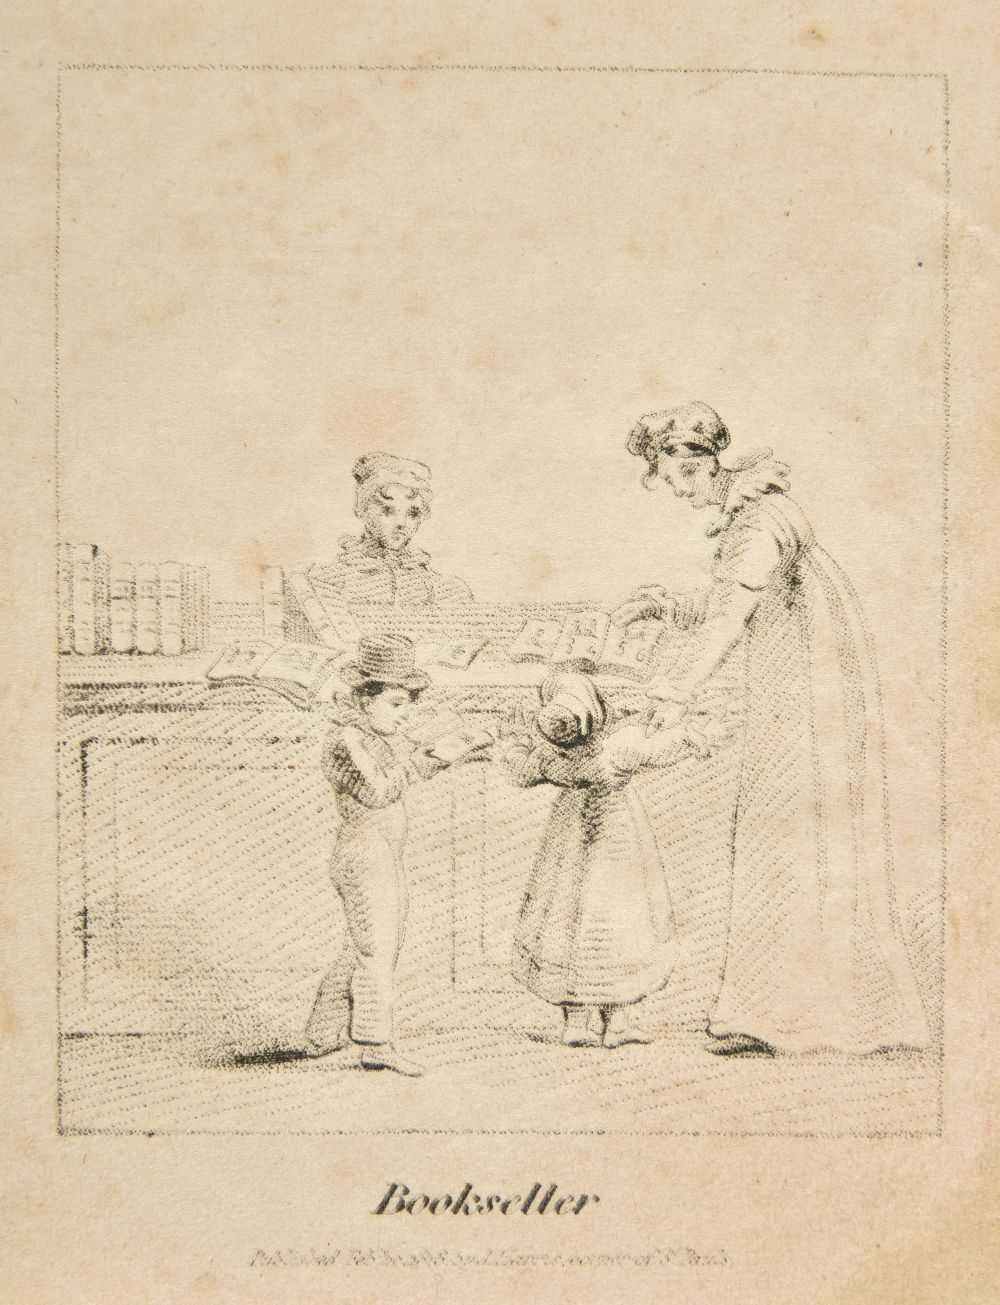 Lot 318 - Harris and Son, publisher. A Visit to the Bazaar, 1820